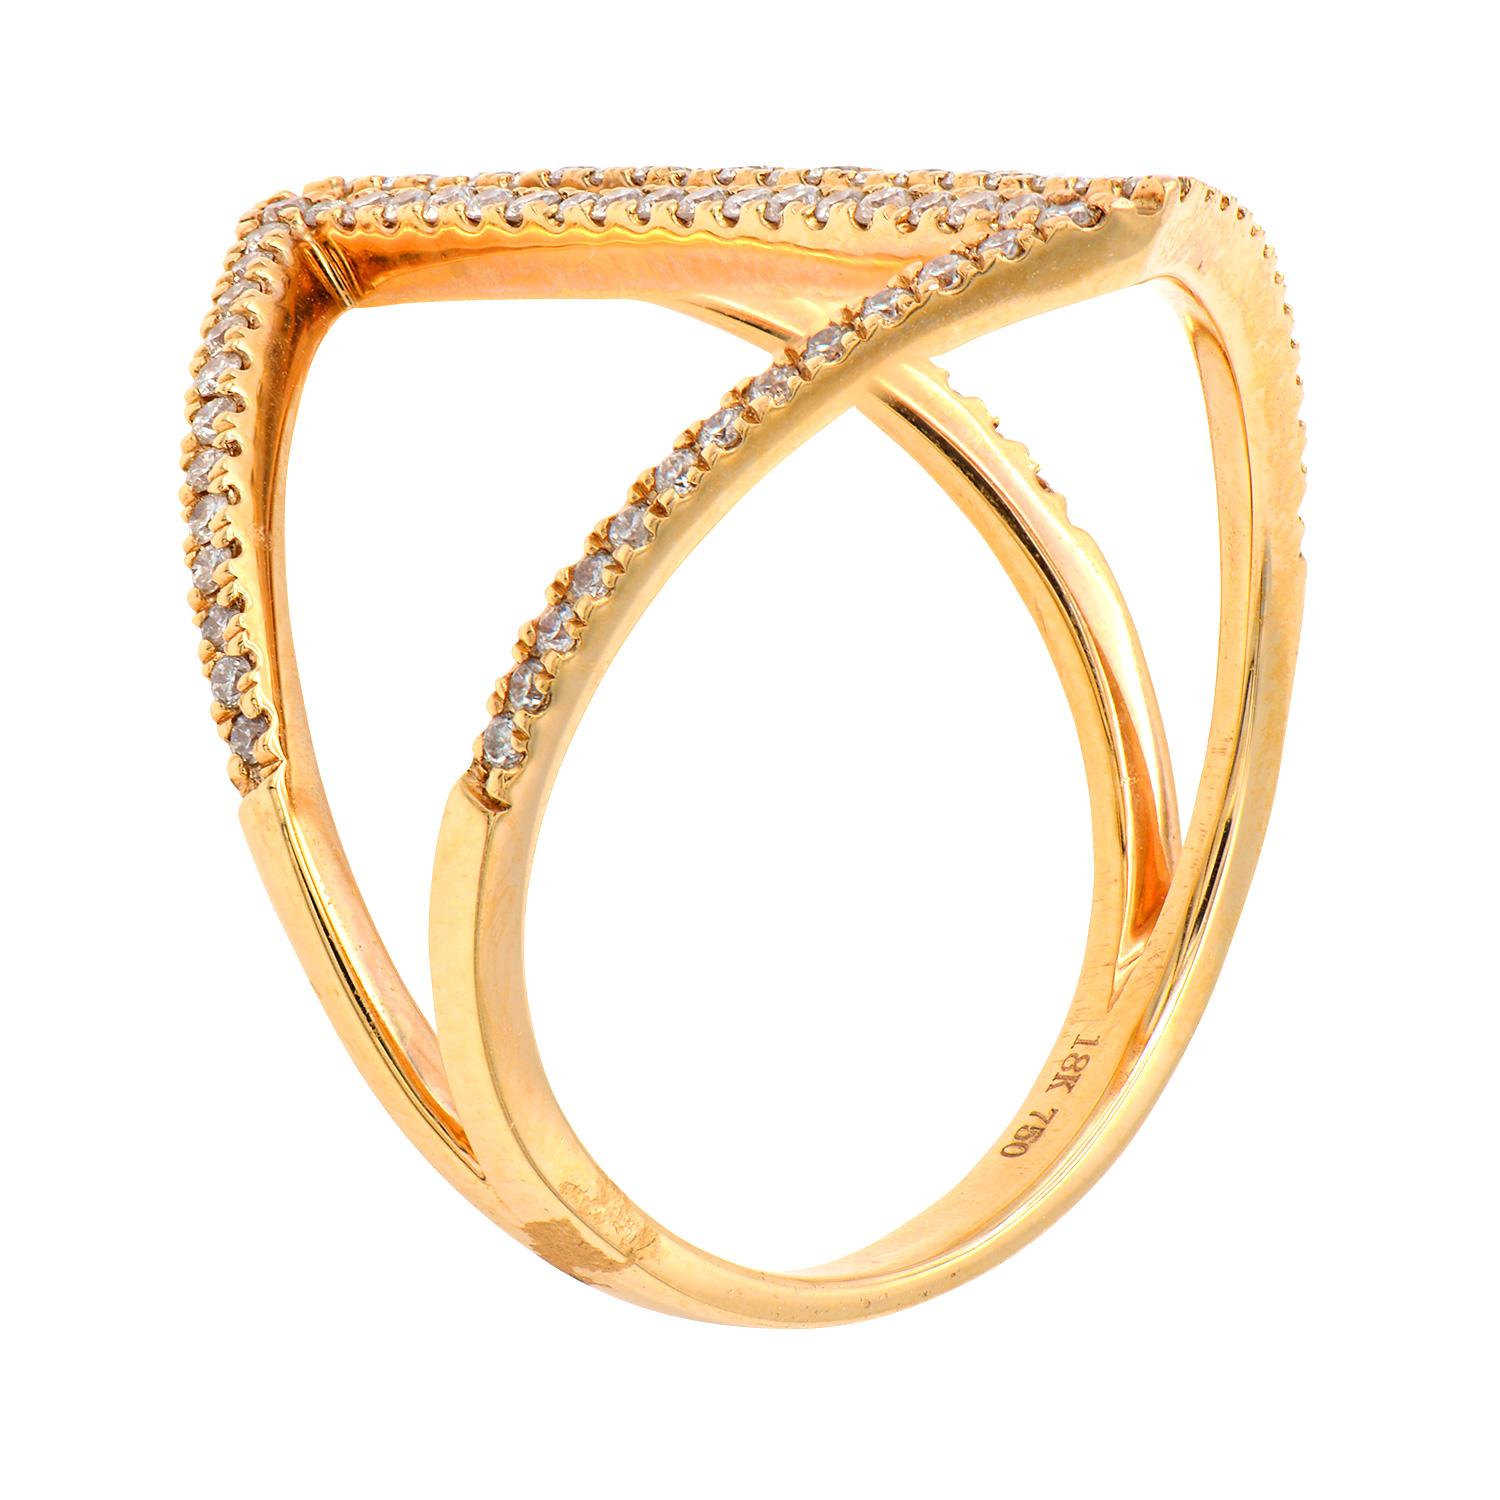 This unique fashionable ring is sure to get many compliments and enhance your look. Each ring is made from 3.4 grams of rose gold containing 86 round VS2, G color diamonds totaling 0.34 carats. Ring size 6.5 